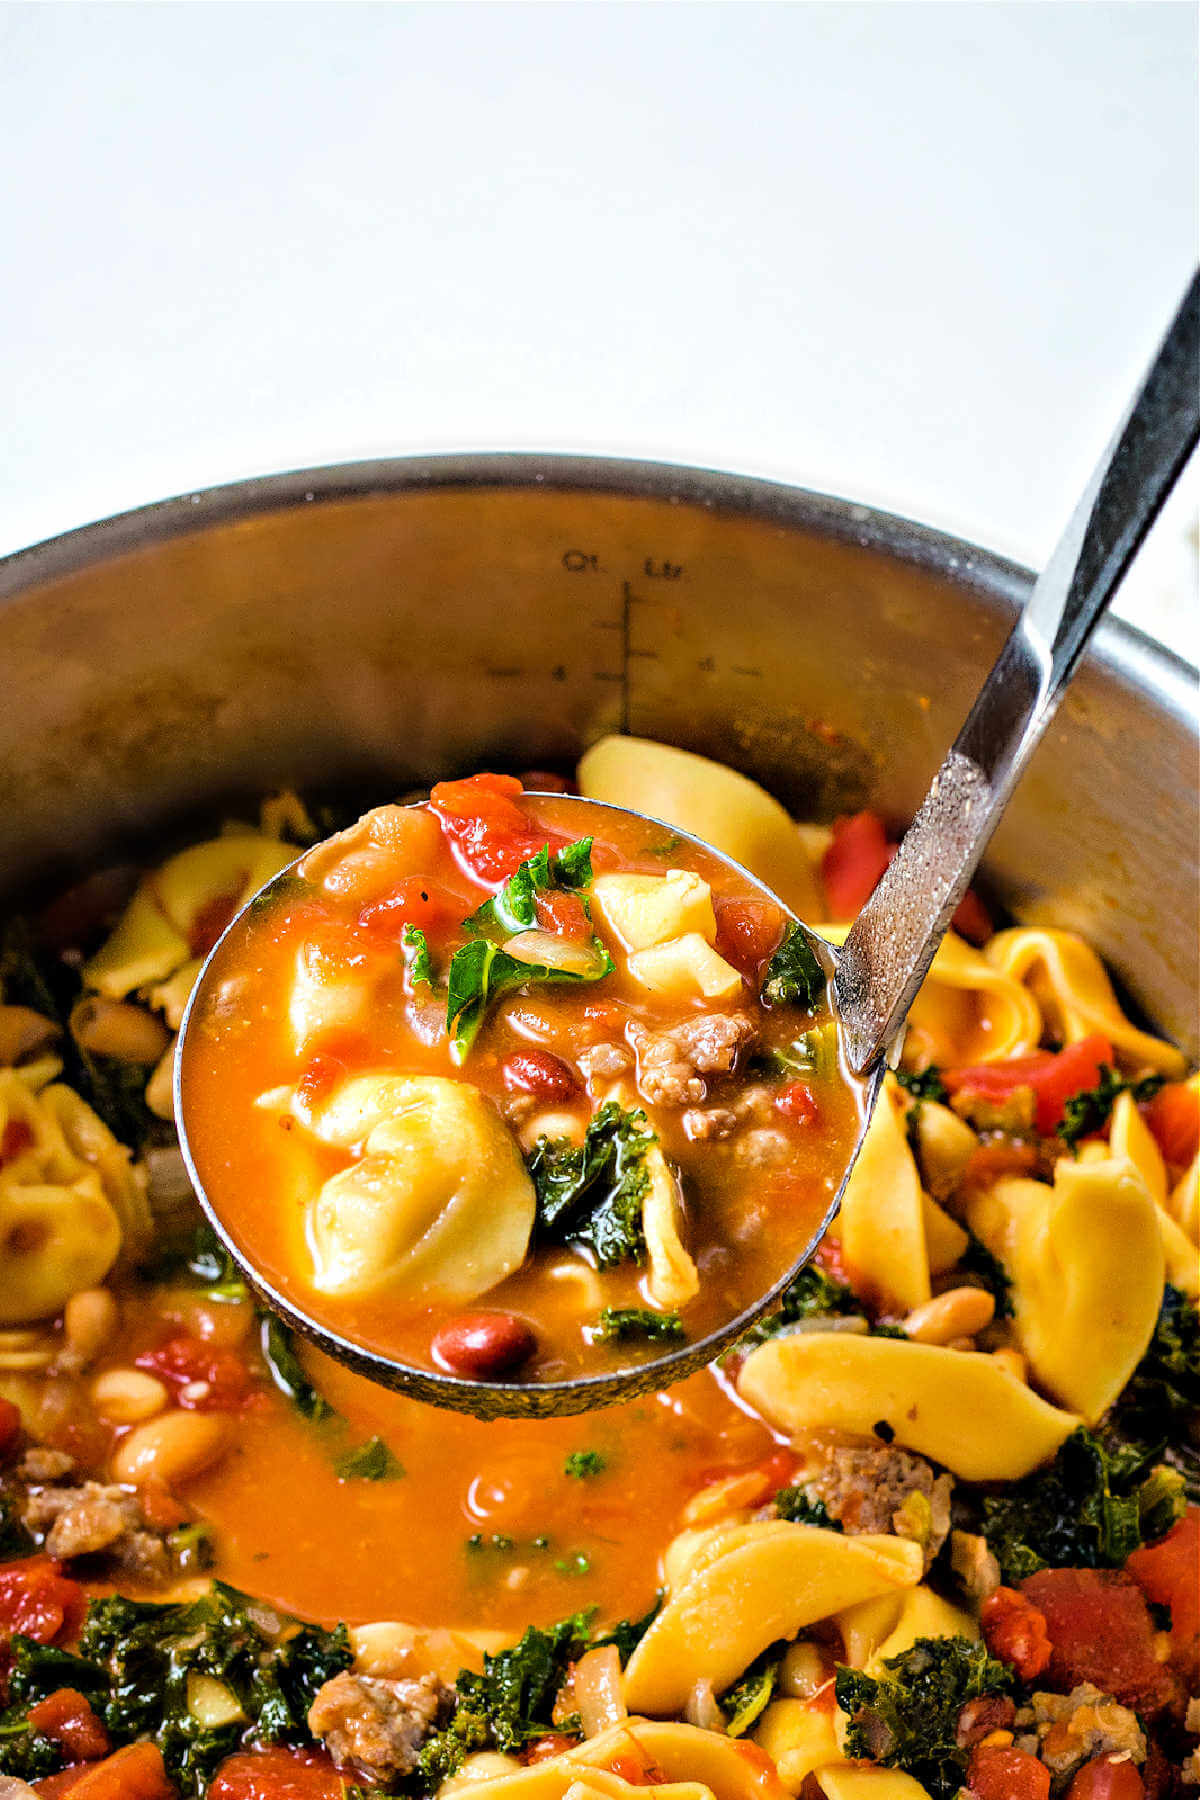 a ladle lifting out of a pot of sausage tortellini soup,